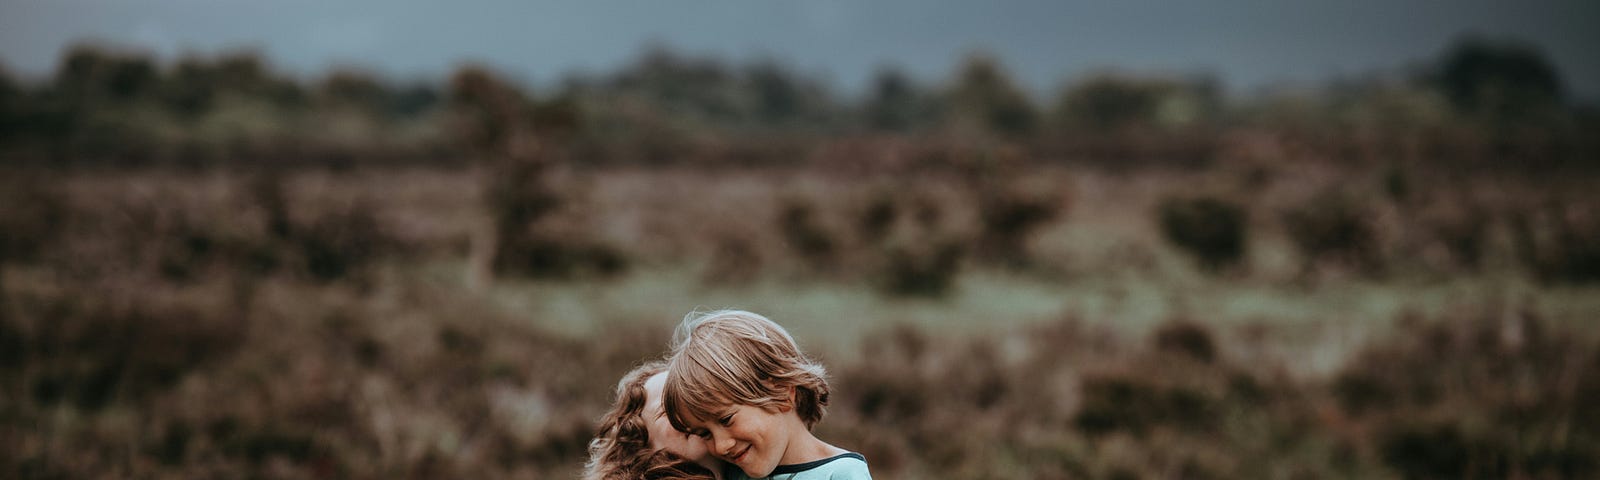 Two child friends hugging each other in the middle of a grassfield.